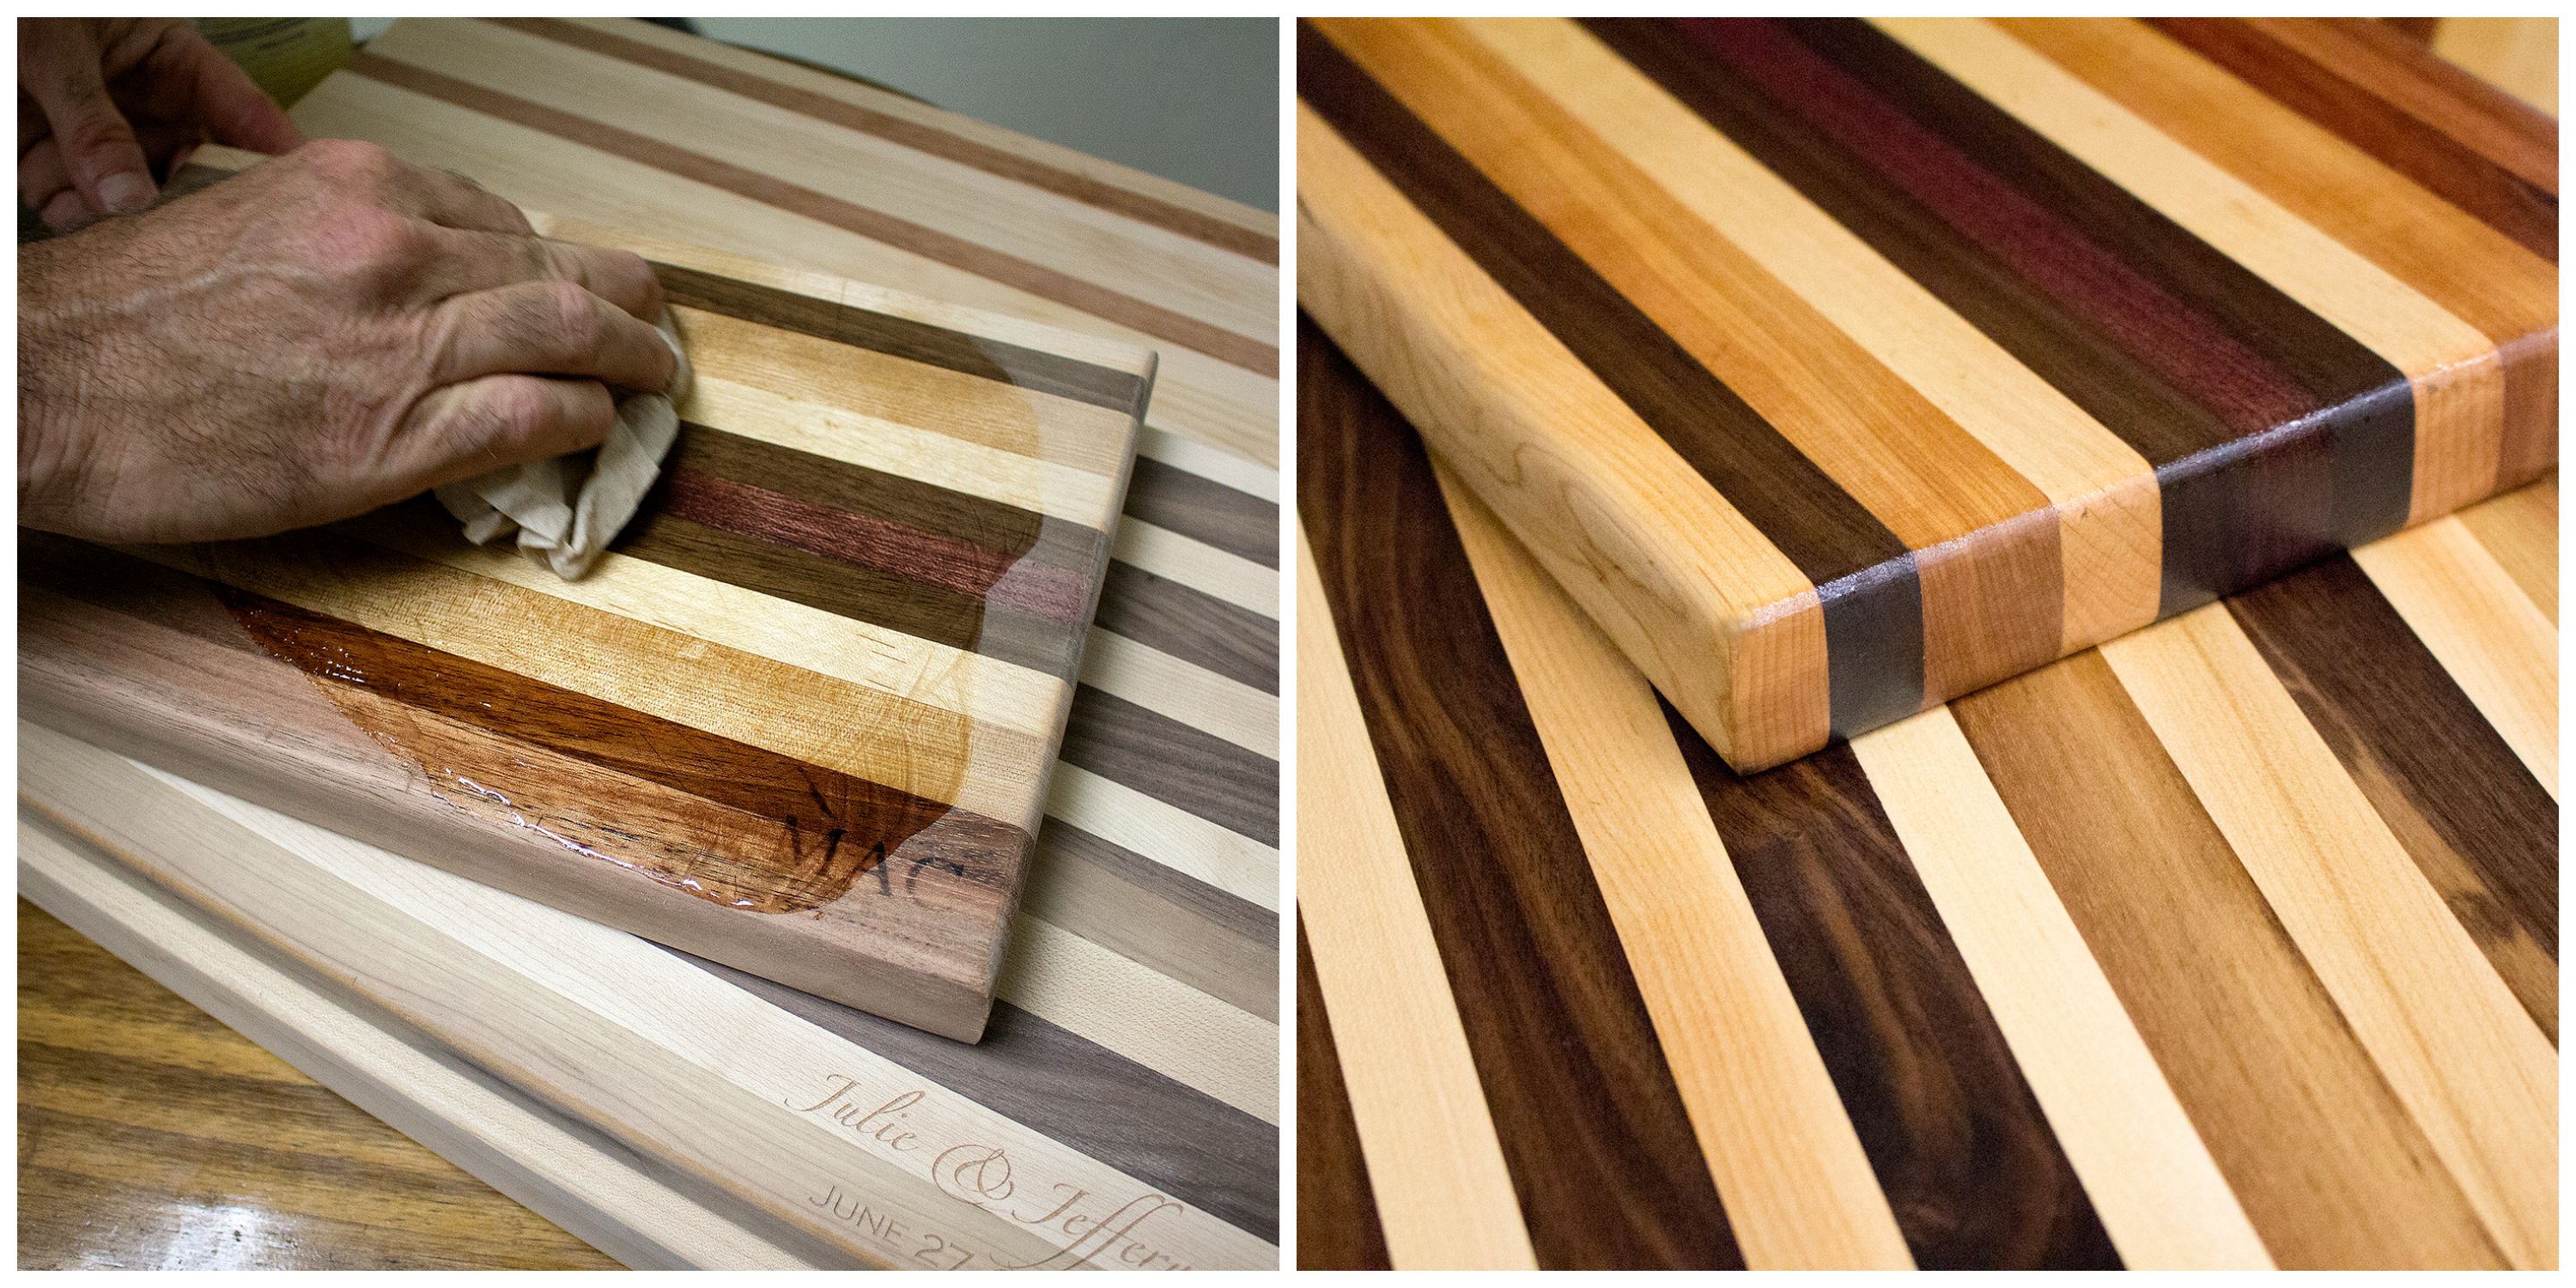 Top 5 Tips: How to Care For Your Wood Cutting Board - ASTIG Vegan